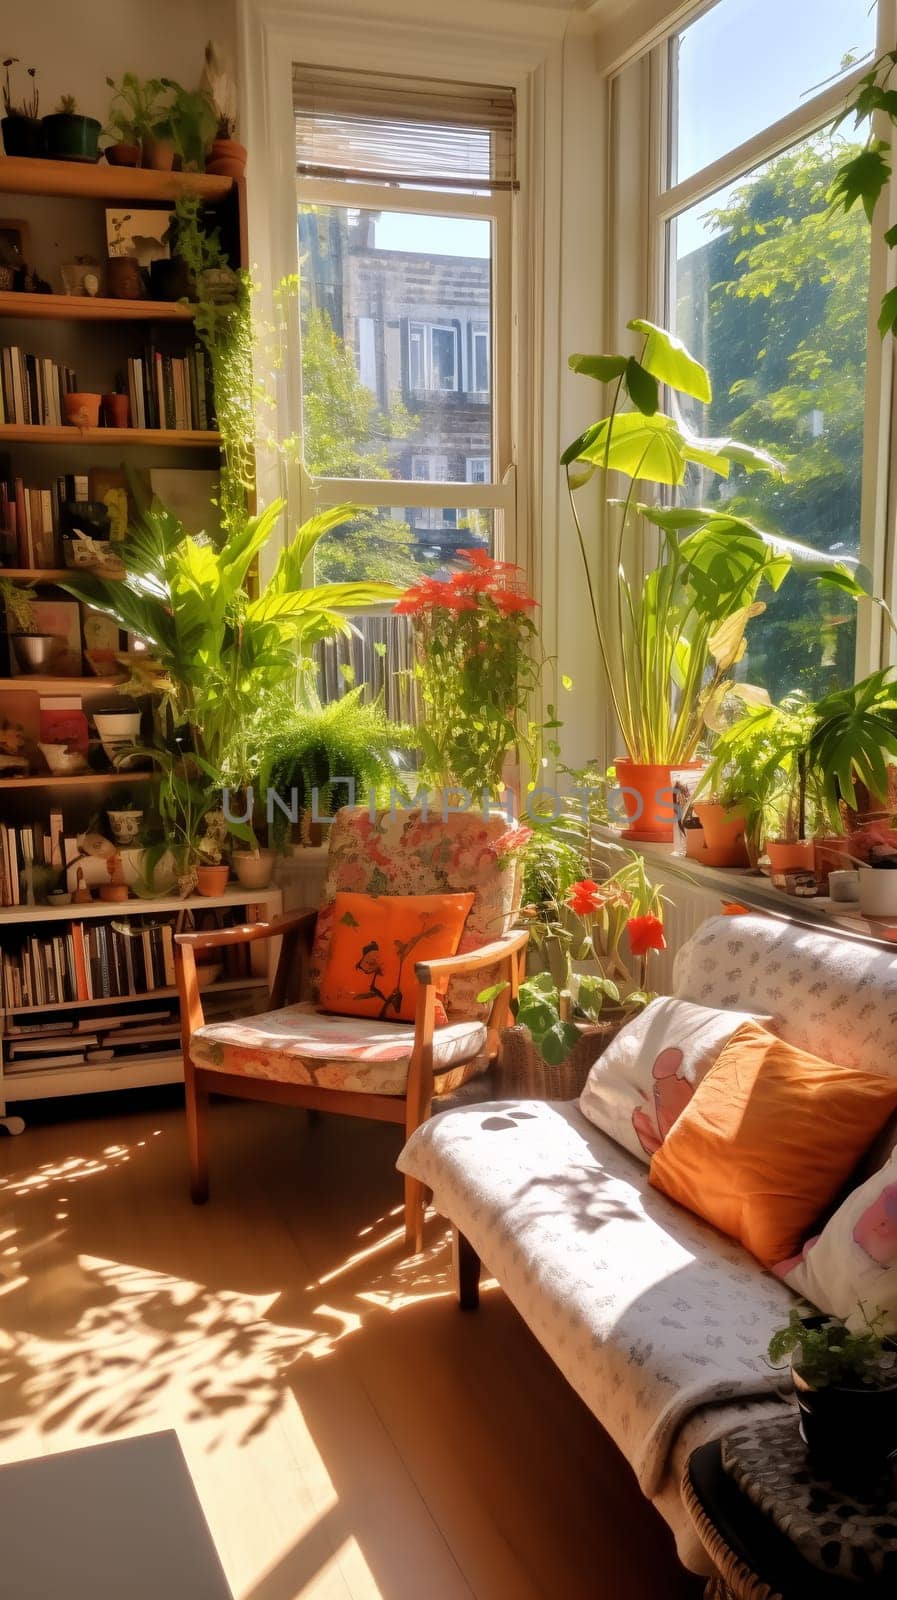 A tranquil morning scene featuring a comfortable living area bathed in sunlight streaming through the window, surrounded by lush green indoor plants - Generative AI